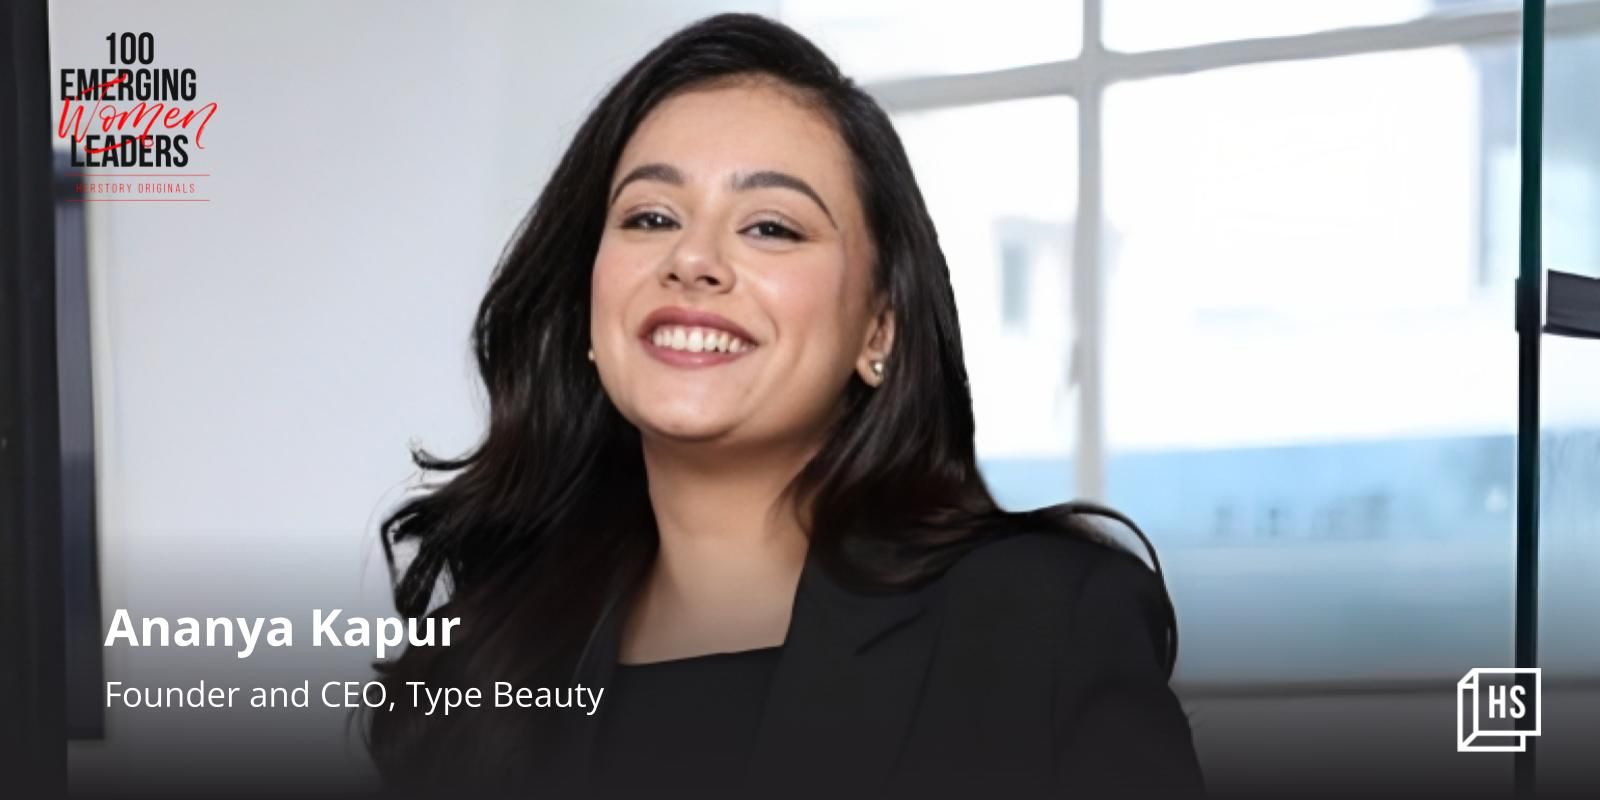 [100 Emerging Women Leaders] Ananya Kapur is building a beauty brand that is merging makeup and skincare
